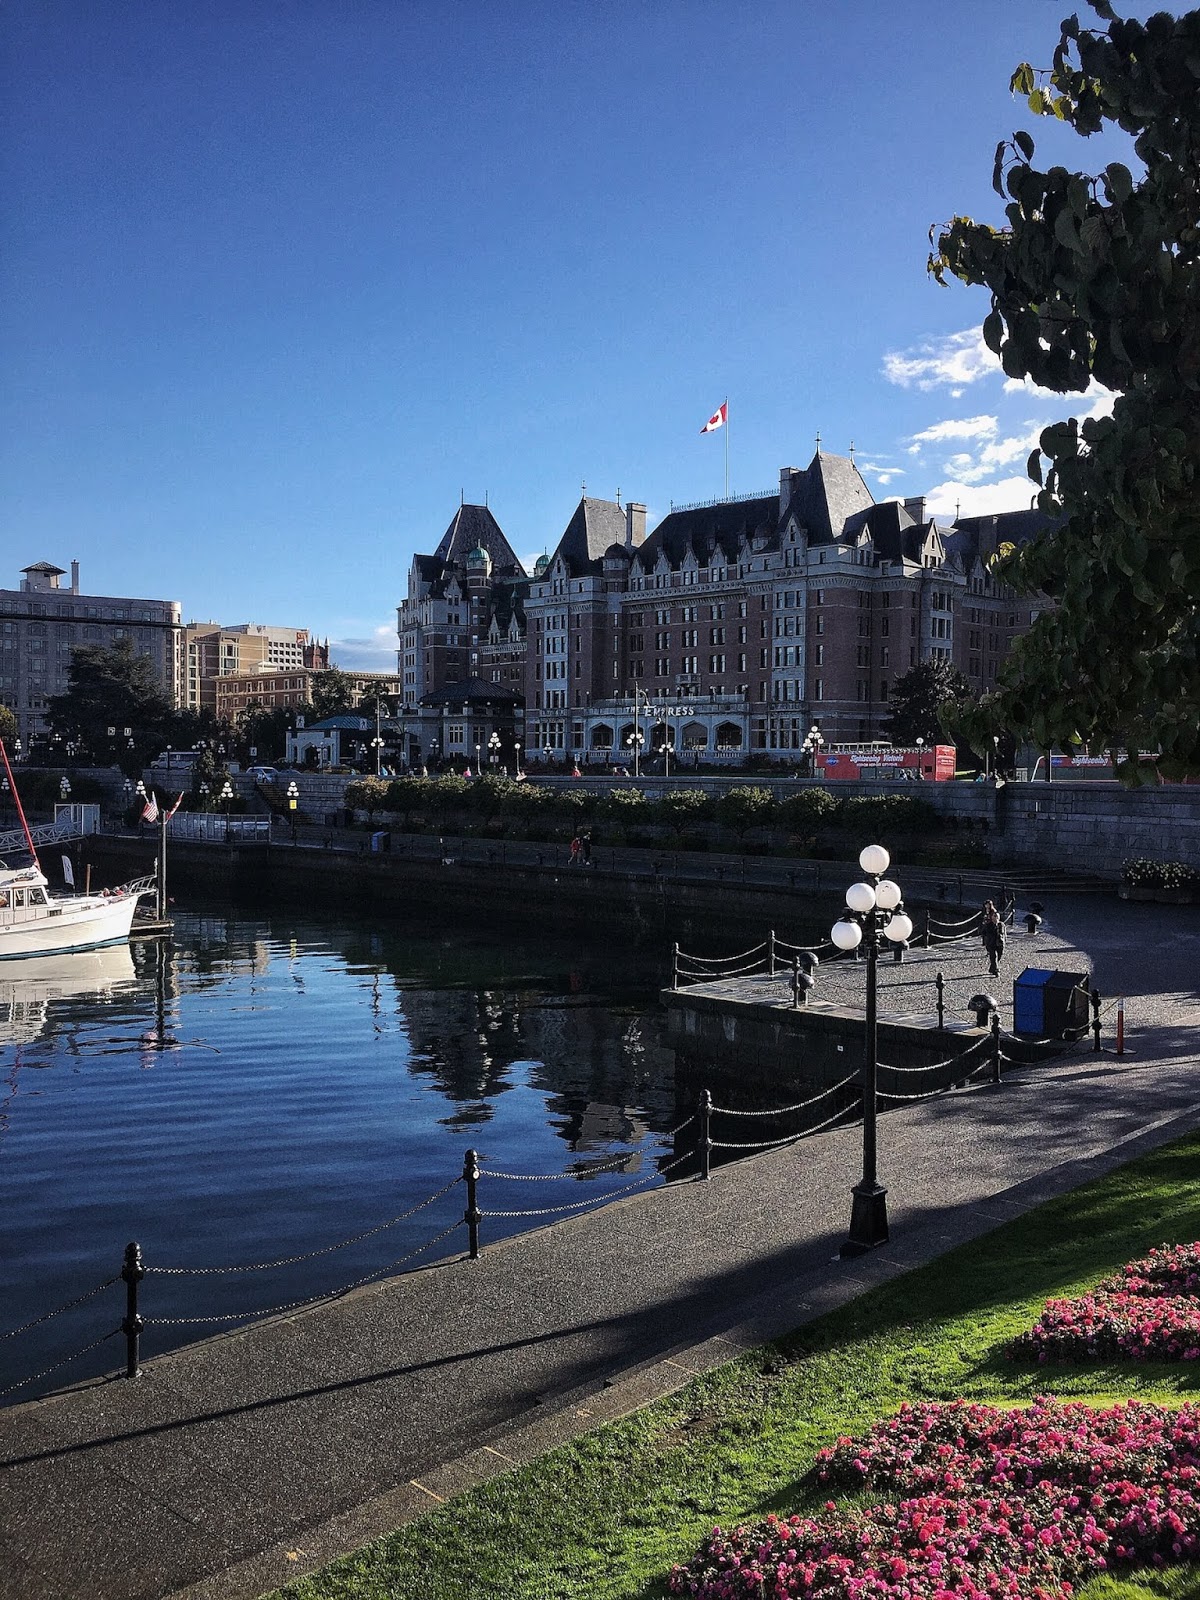 A travel diary of Victoria, B.C. by Vancouver travel blogger Aleesha Harris.